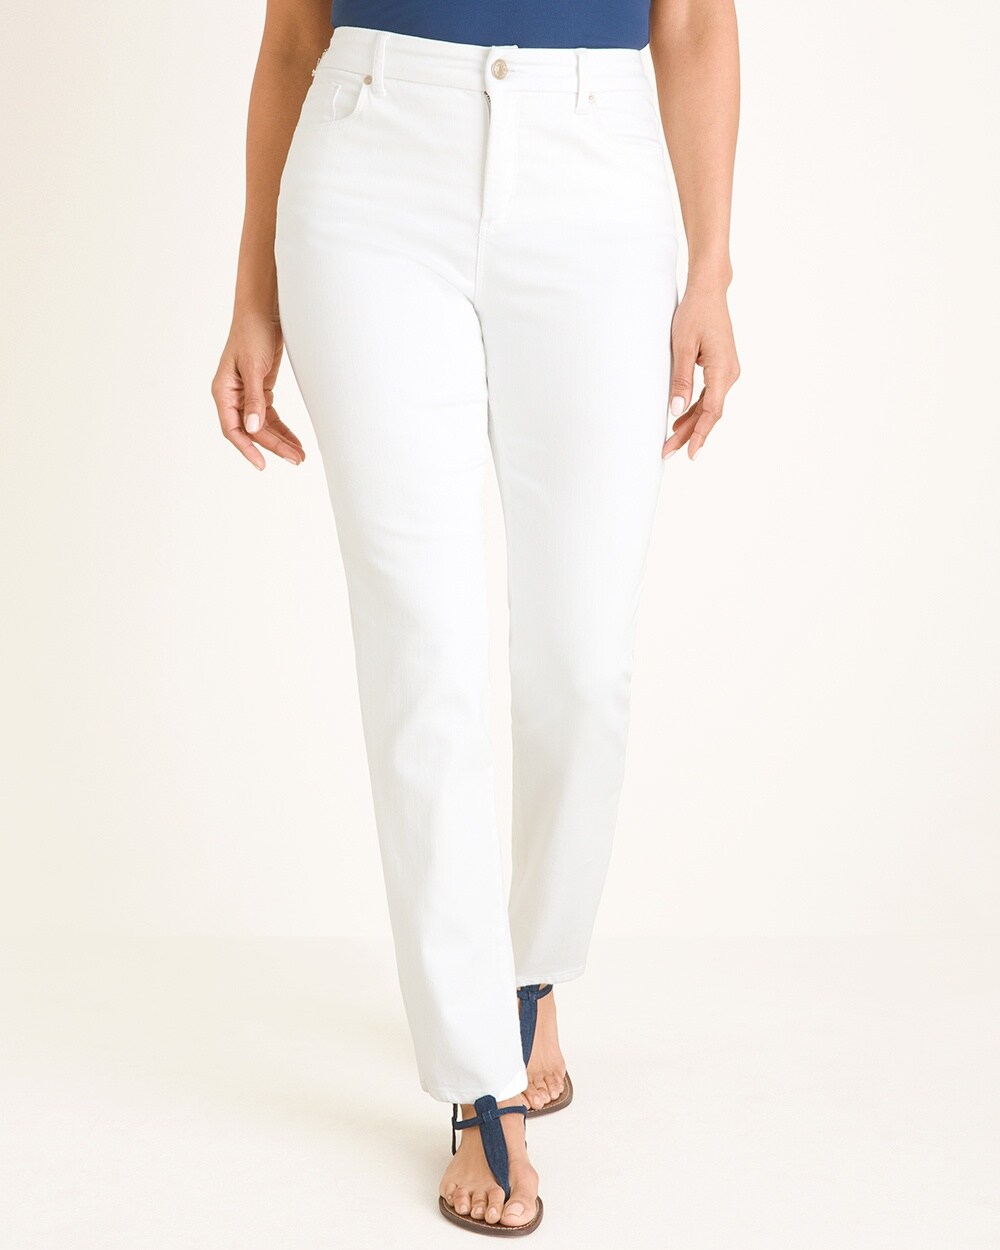 So Slimming No-Stain White Girlfriend Jeans